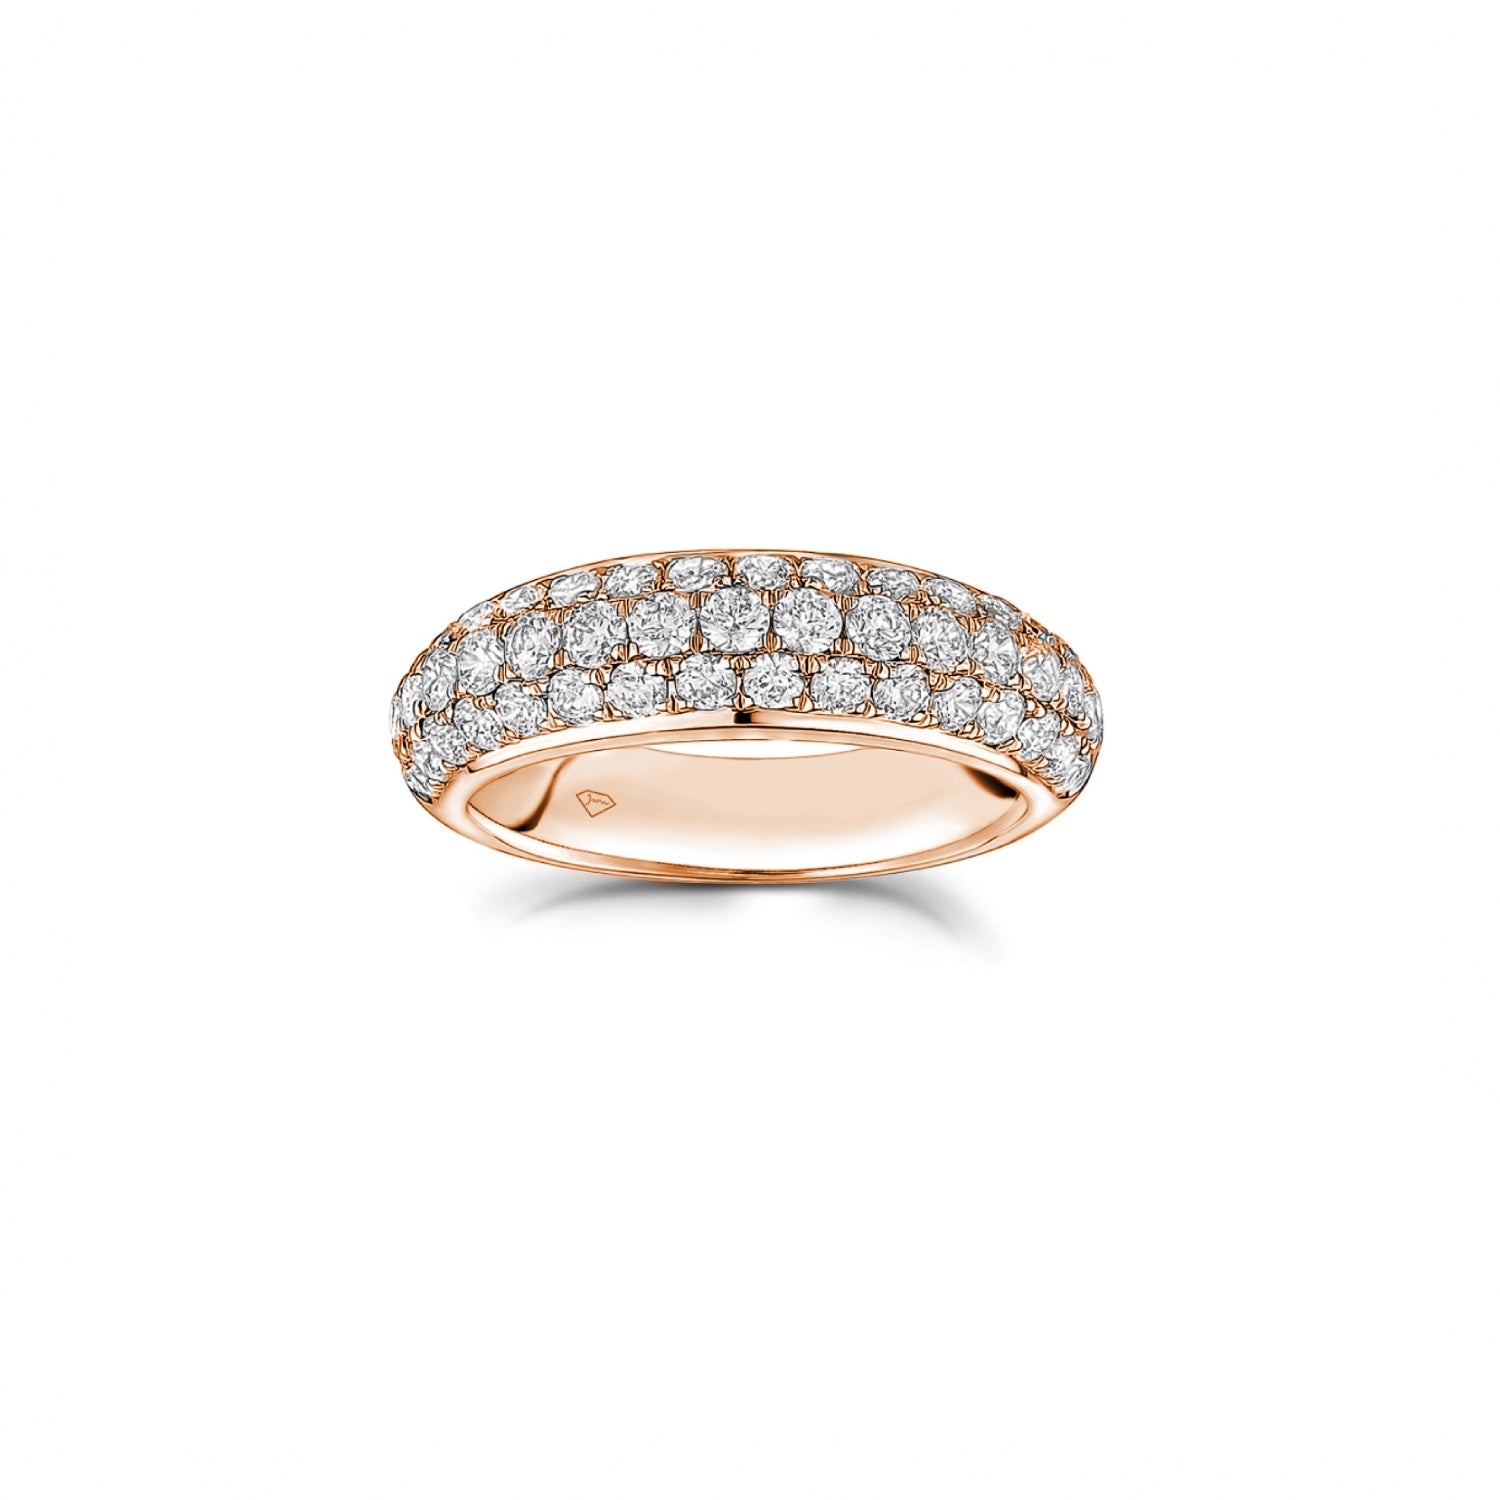 Three-Row Diamond Pavé Domed Ring in Rose Gold